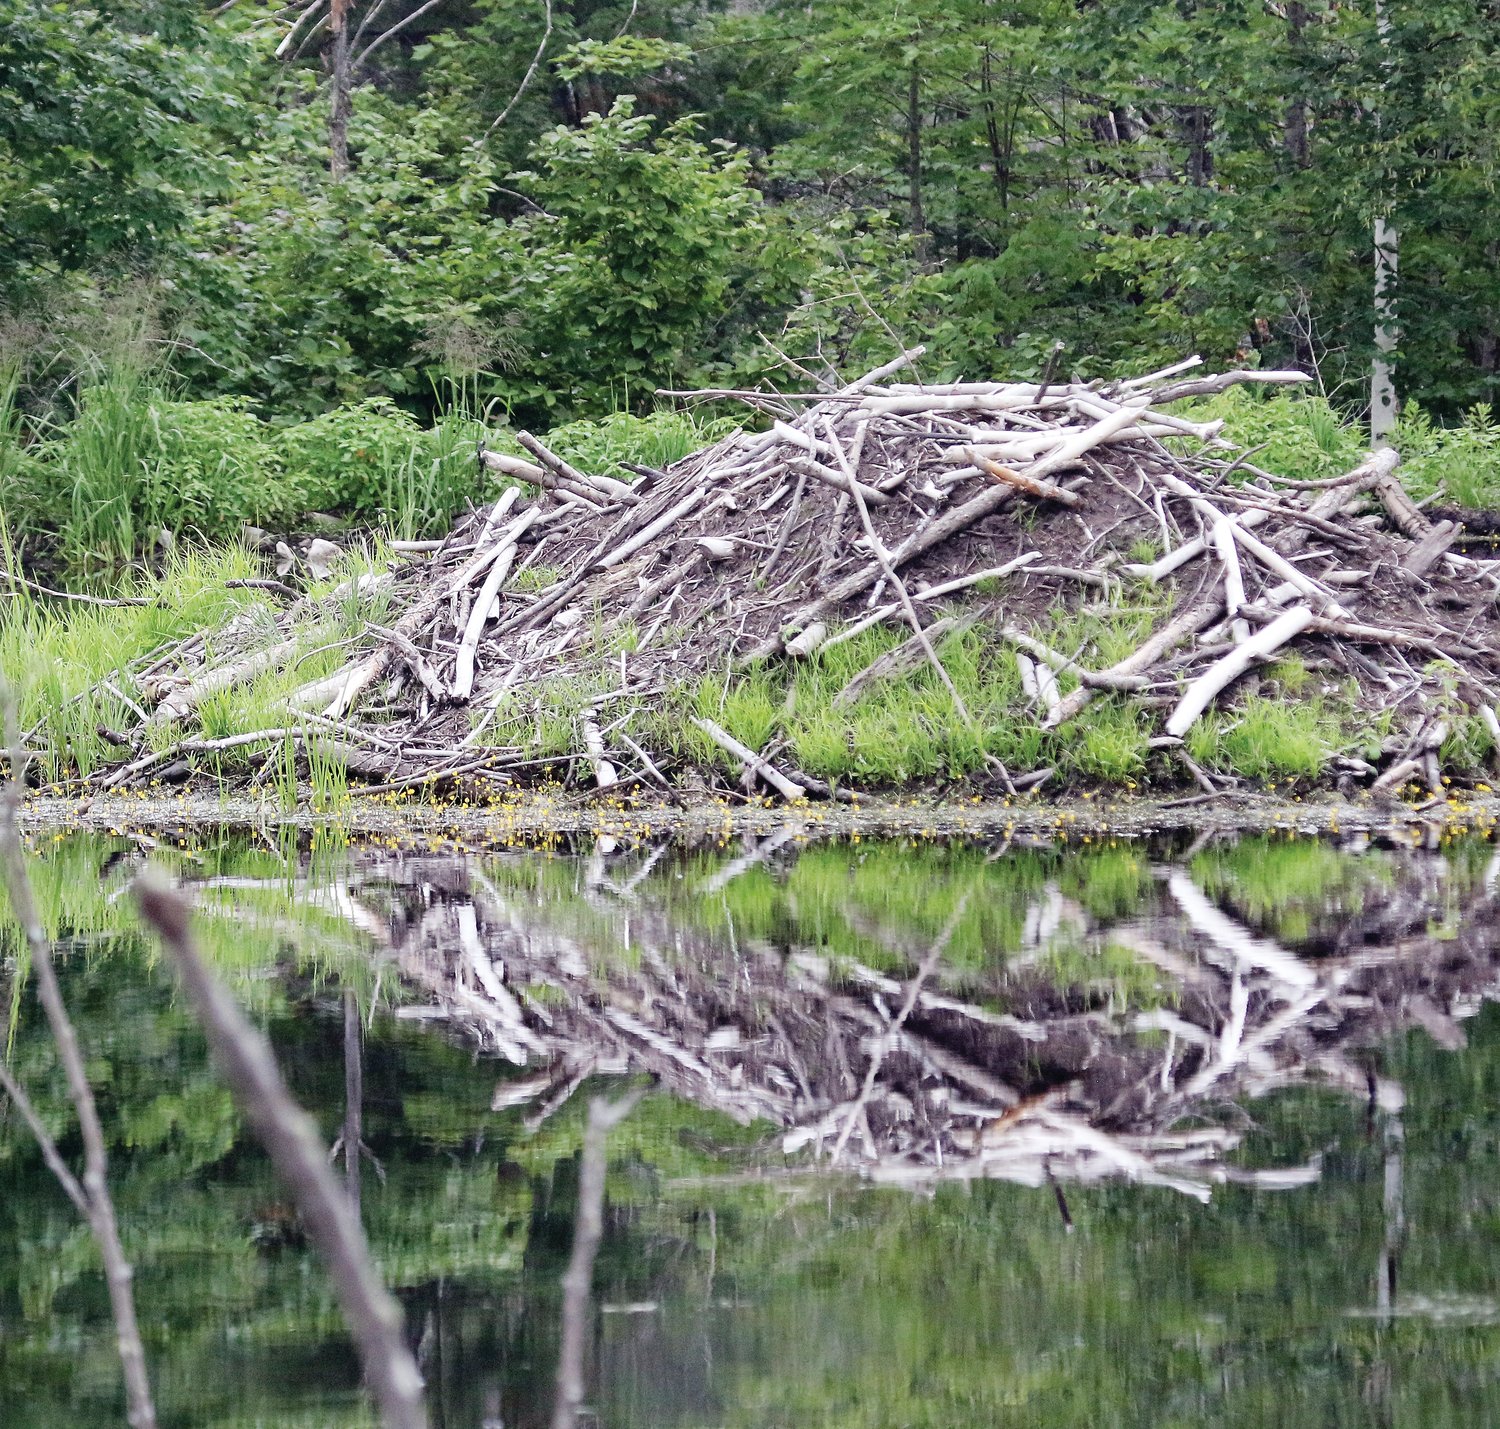 One of three large beaver lodges in the pond reflects in still water.